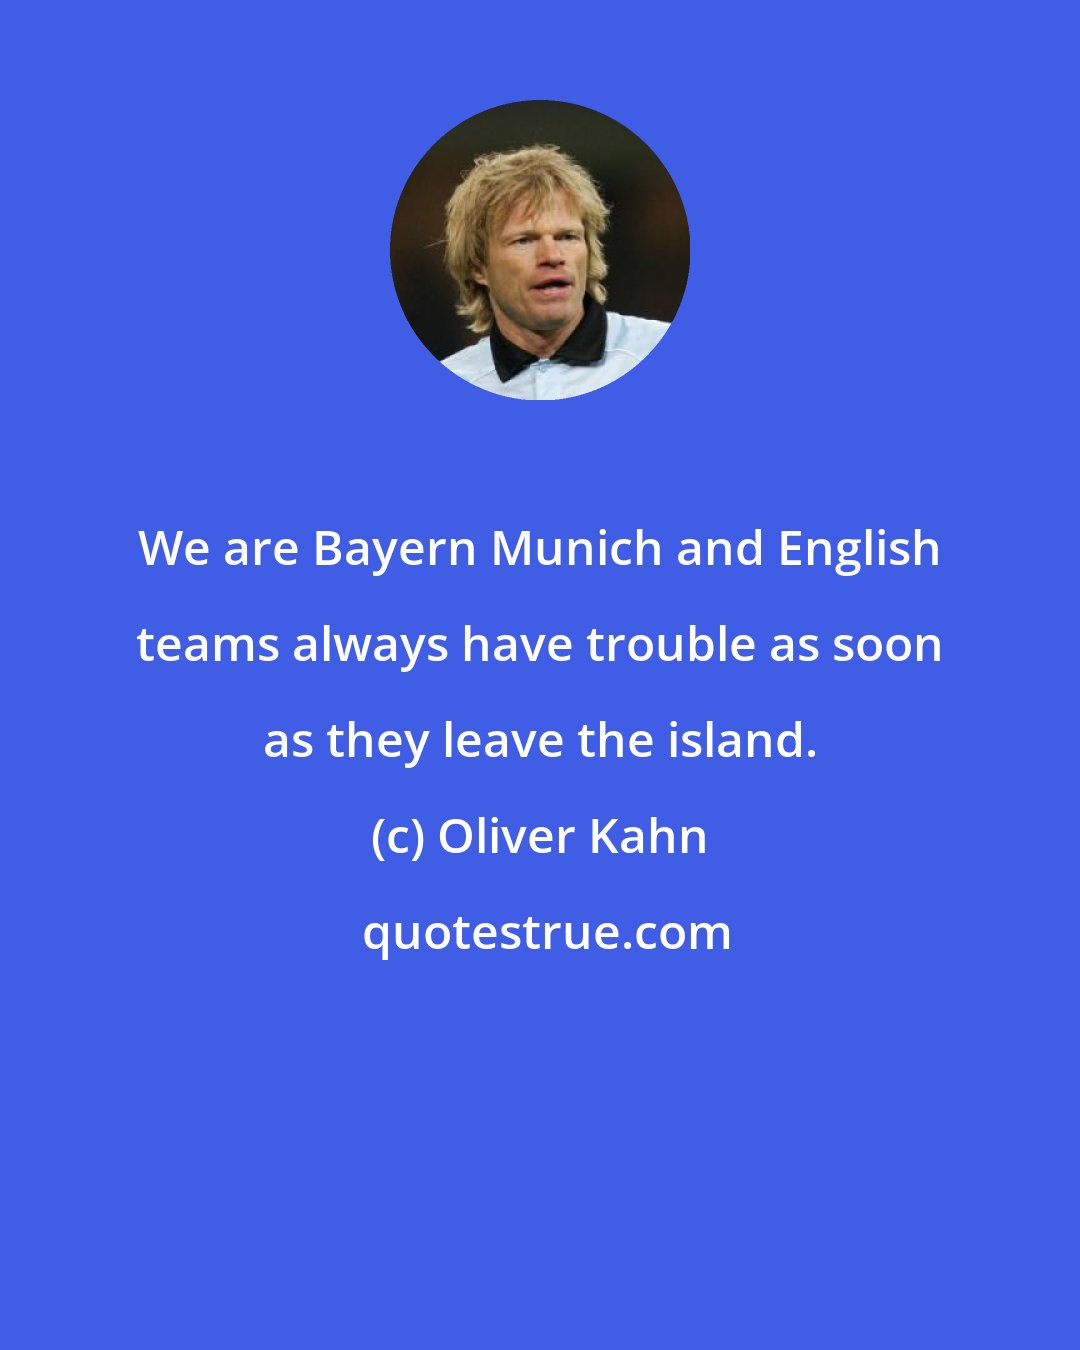 Oliver Kahn: We are Bayern Munich and English teams always have trouble as soon as they leave the island.